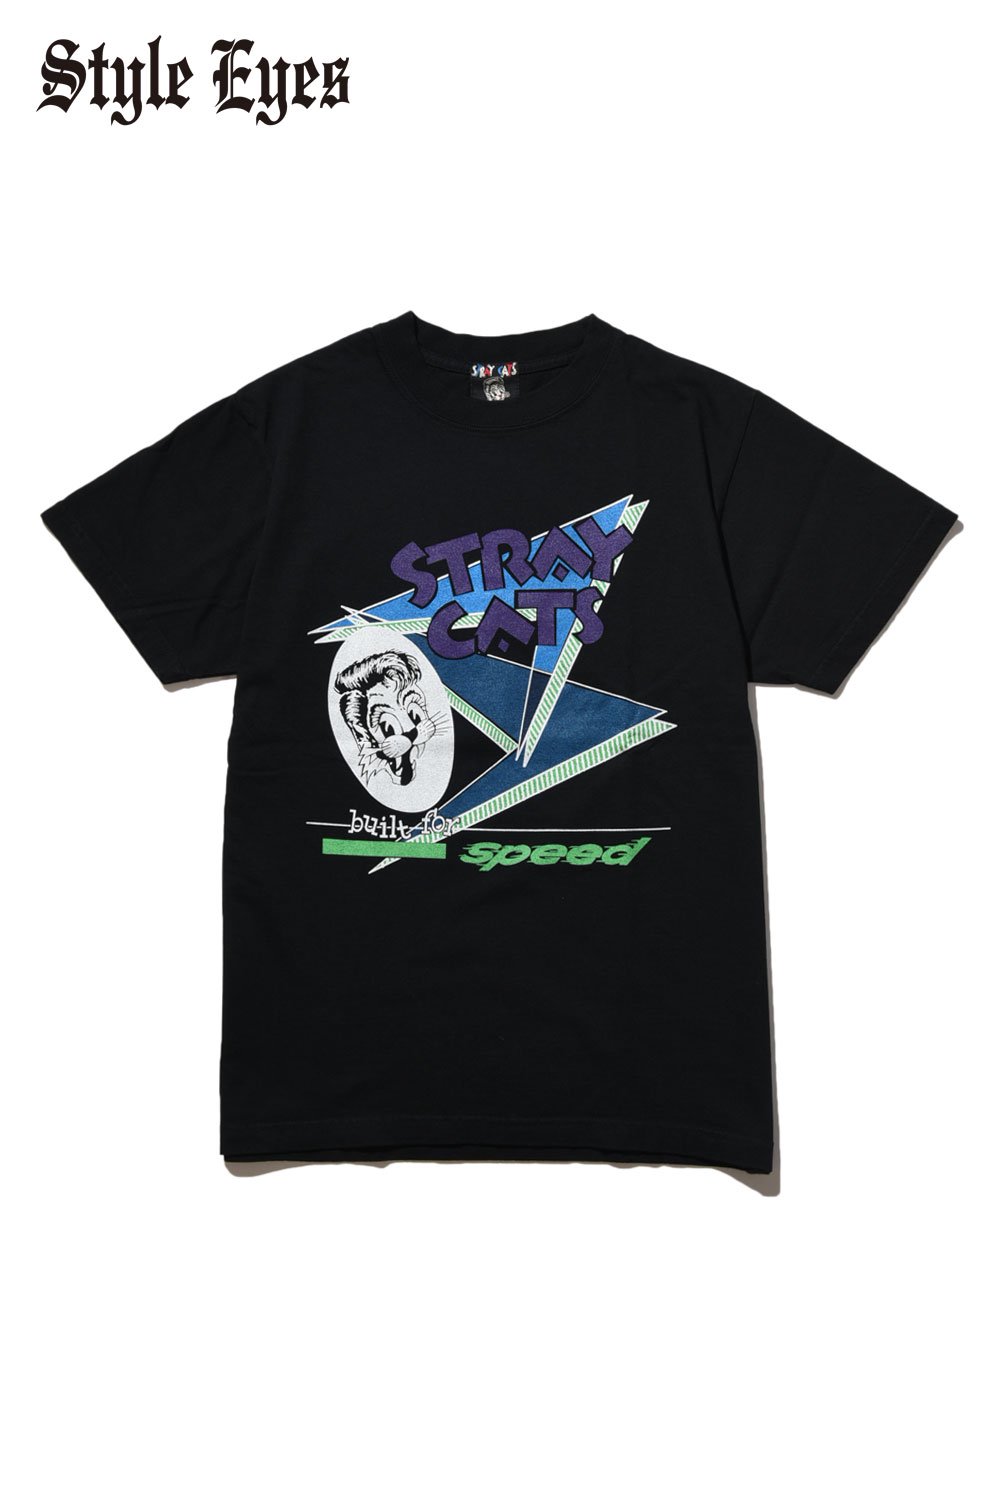 STYLE EYES(スタイルアイズ) Tシャツ STRAY CATS×STYLE EYES 